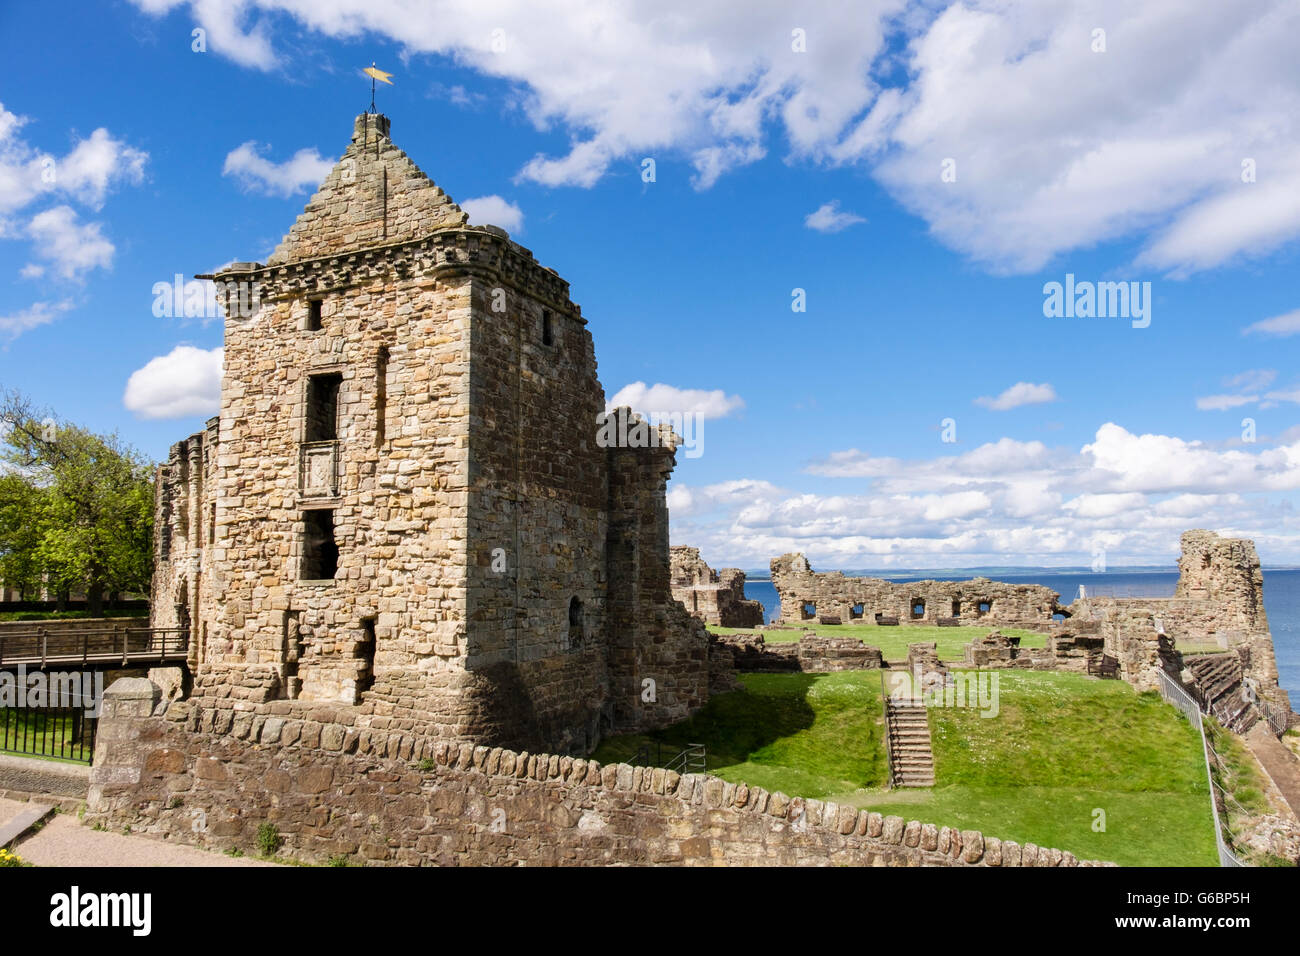 St Andrews castle ruins in grounds on North Sea coast. Royal Burgh of St Andrews, Fife, Scotland, UK, Britain Stock Photo